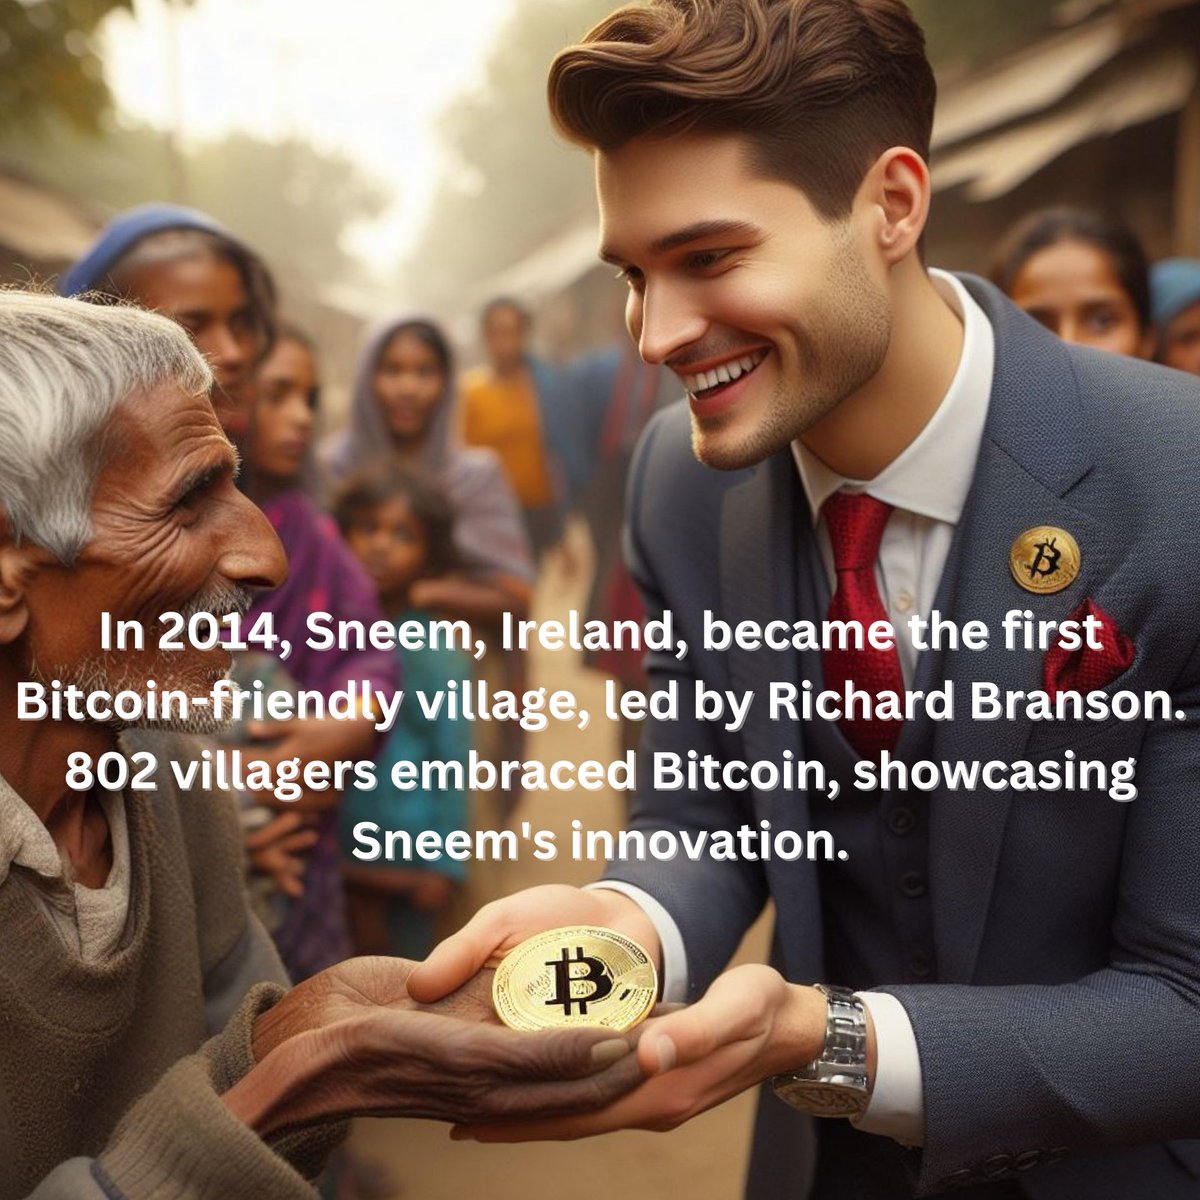 In 2014, Sneem, Ireland, became the first Bitcoin-friendly village, led by Richard Branson. 802 villagers embraced Bitcoin, showcasing Sneem's innovation.